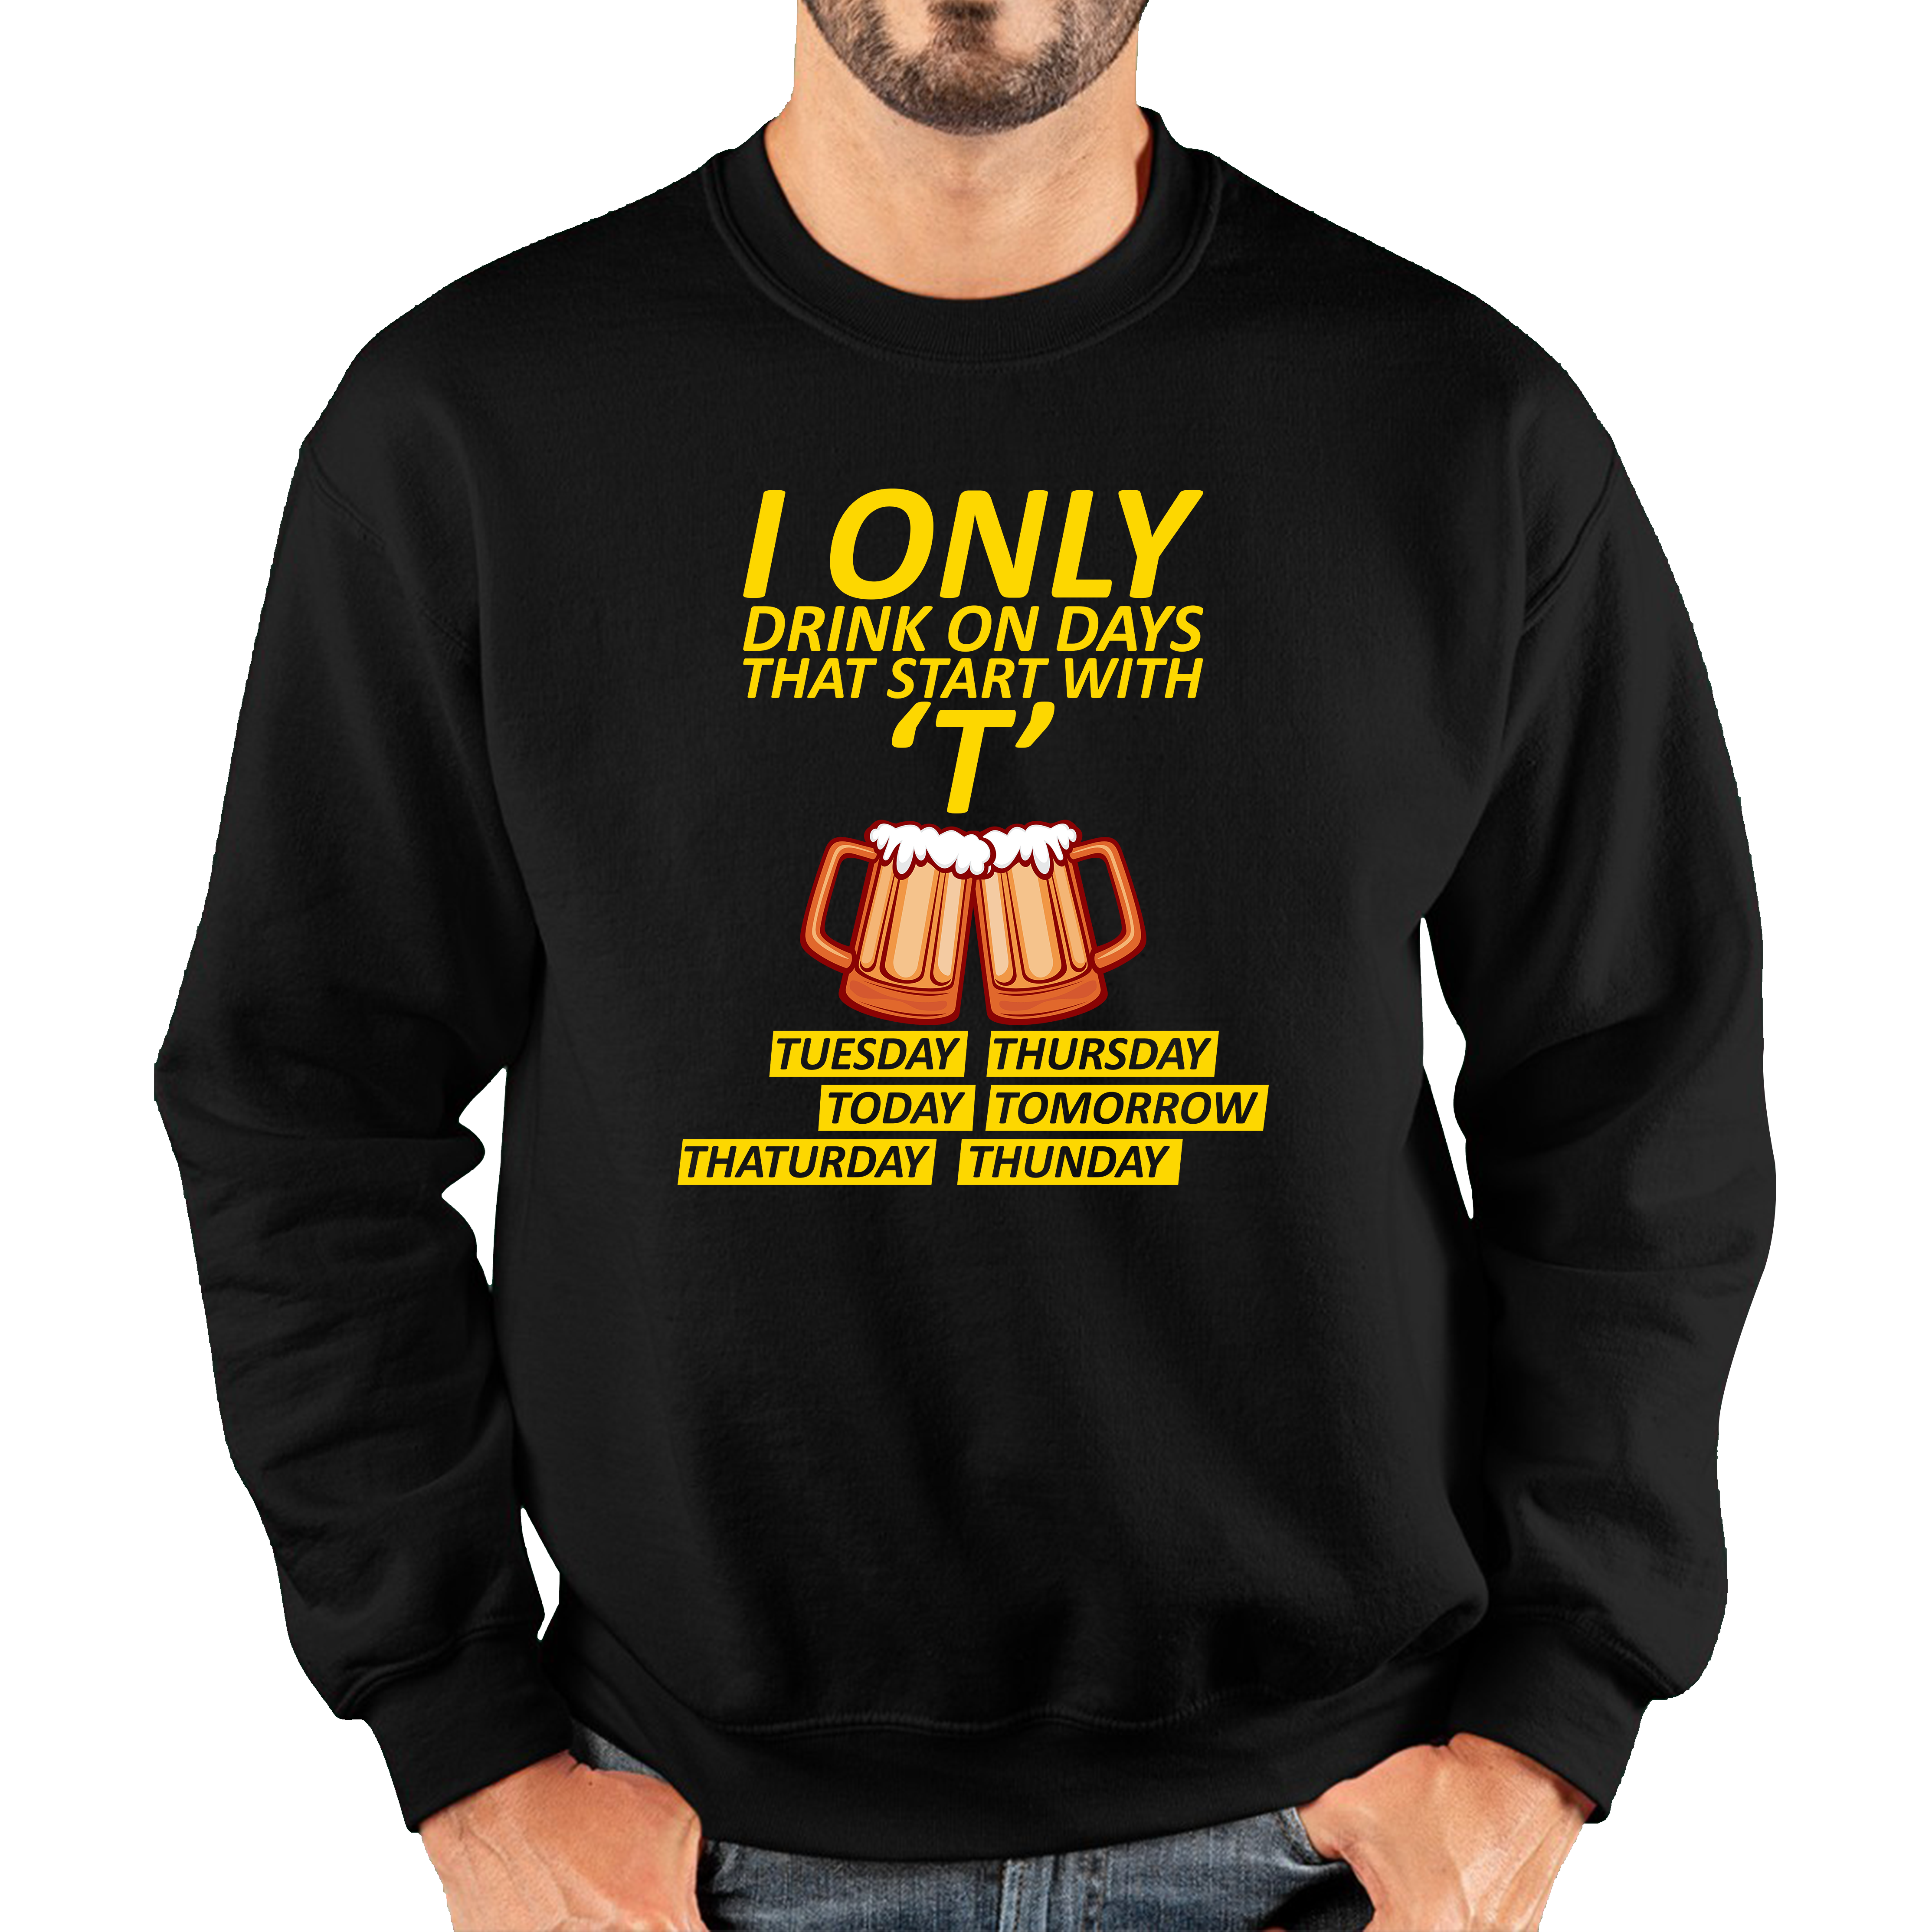 I Only Drink On Days That Start With T, Tuesday, Thursday, Today, Tomorrow, Thaturday, Thunday Adult Sweatshirt